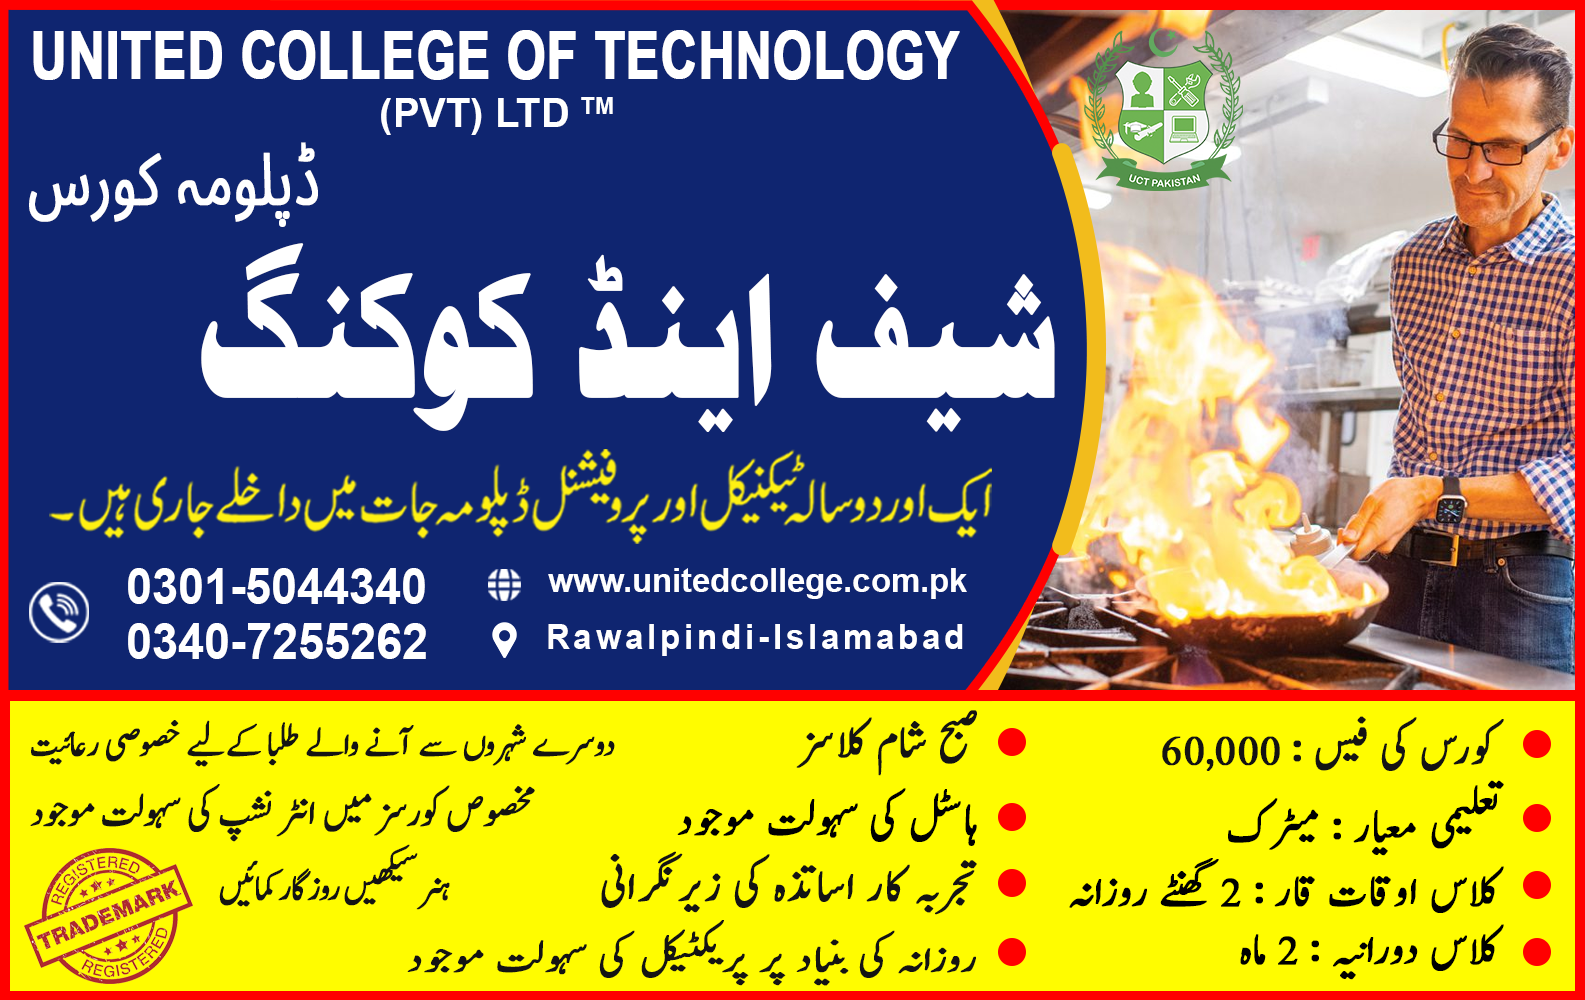 CHEF AND COOKING COURSE IN RAWALPINDI ISLAMABAD